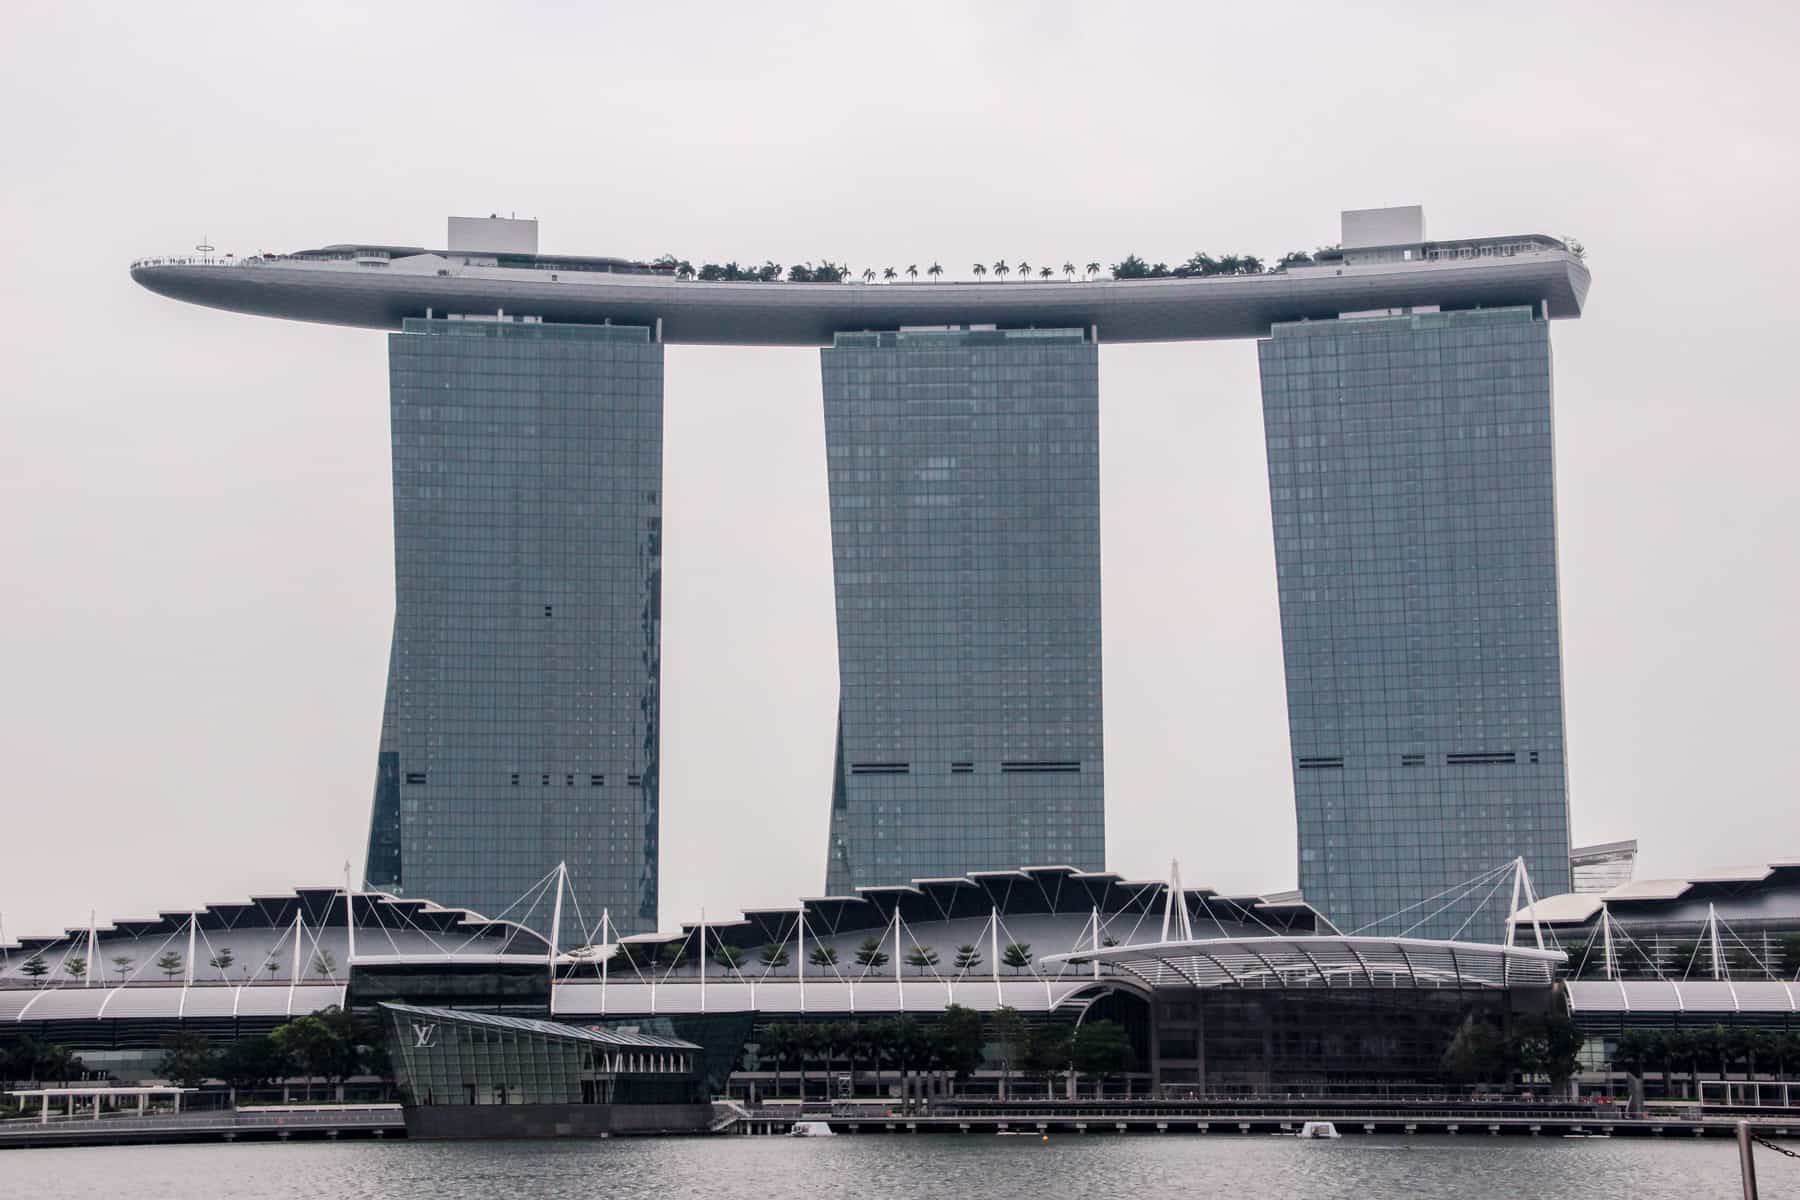 The Marina Bays Sands Hotel in Singapore, shaped like a boat resting on three towers